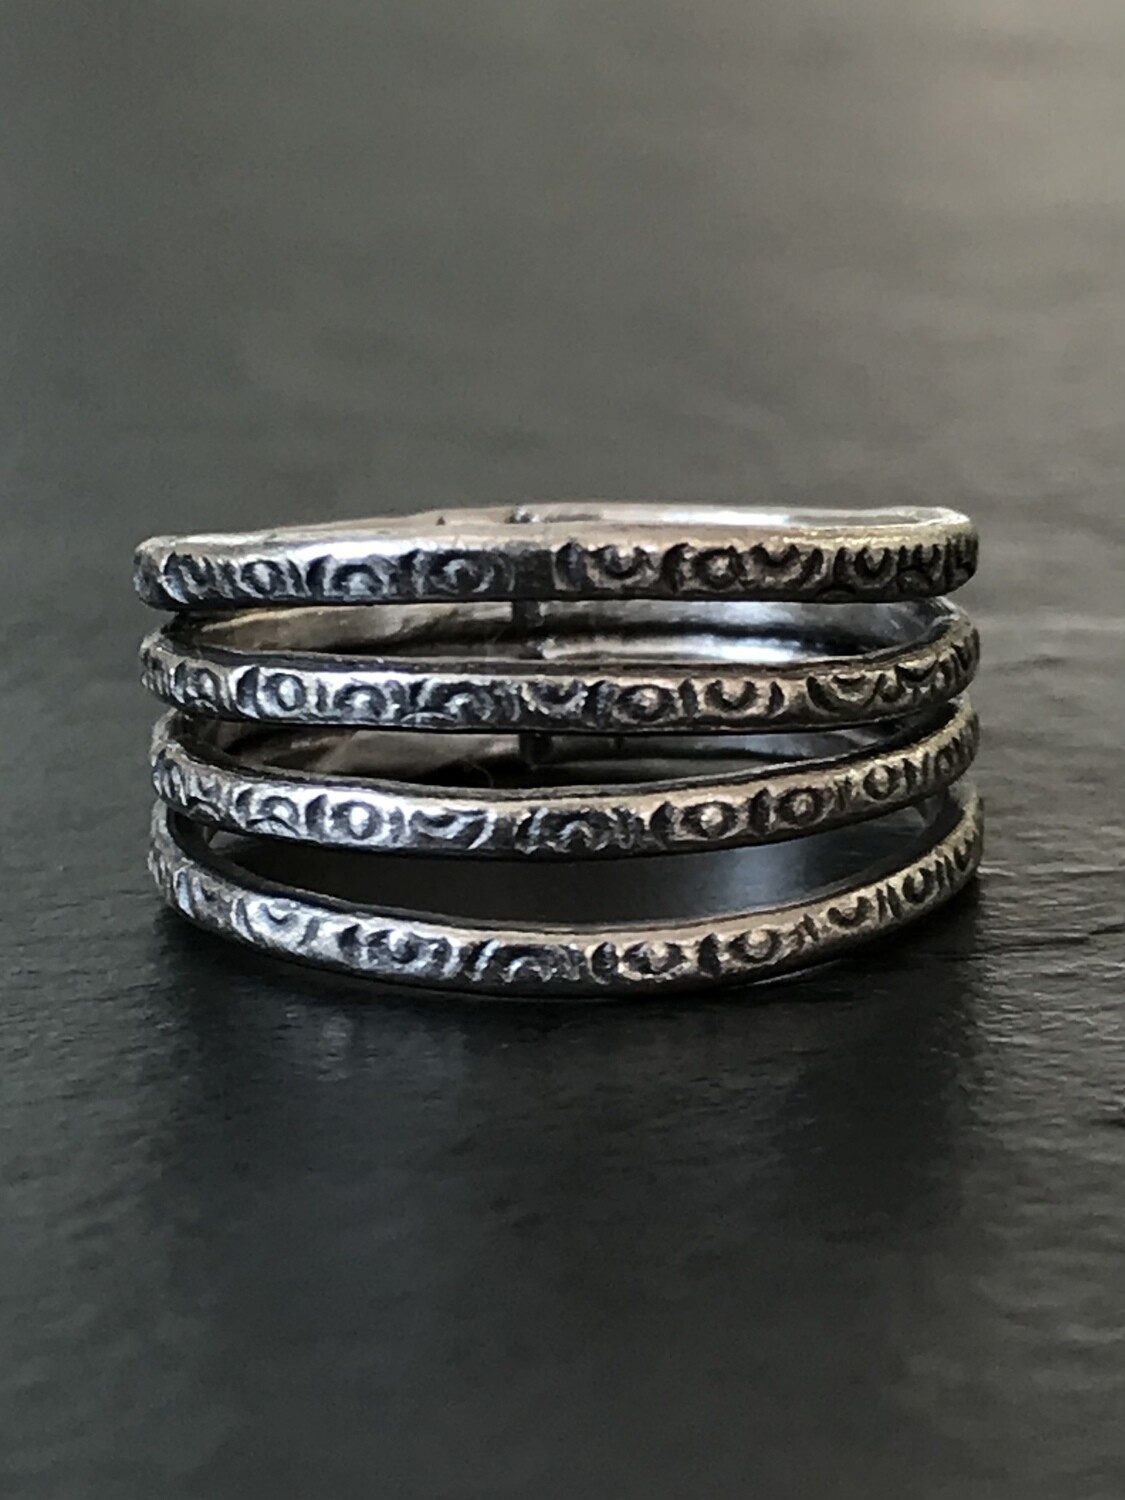 Hill Tribe Silver Four Tribes Ring - RAN4-2